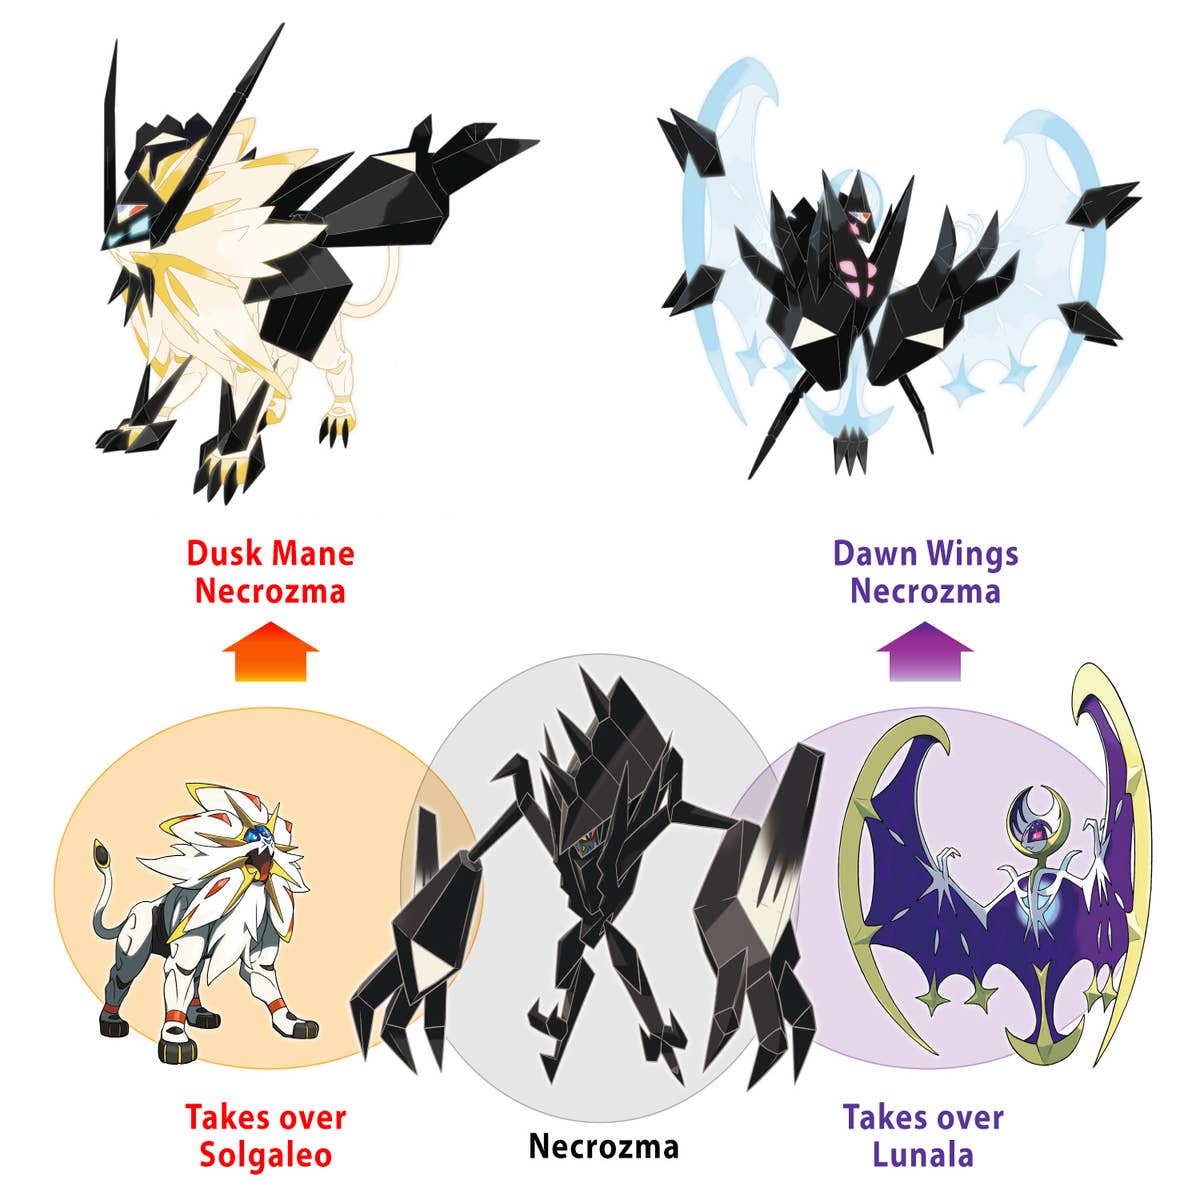 Pokemon Ultra Sun & Moon feature intros Dusk Mane and Dawn Wings